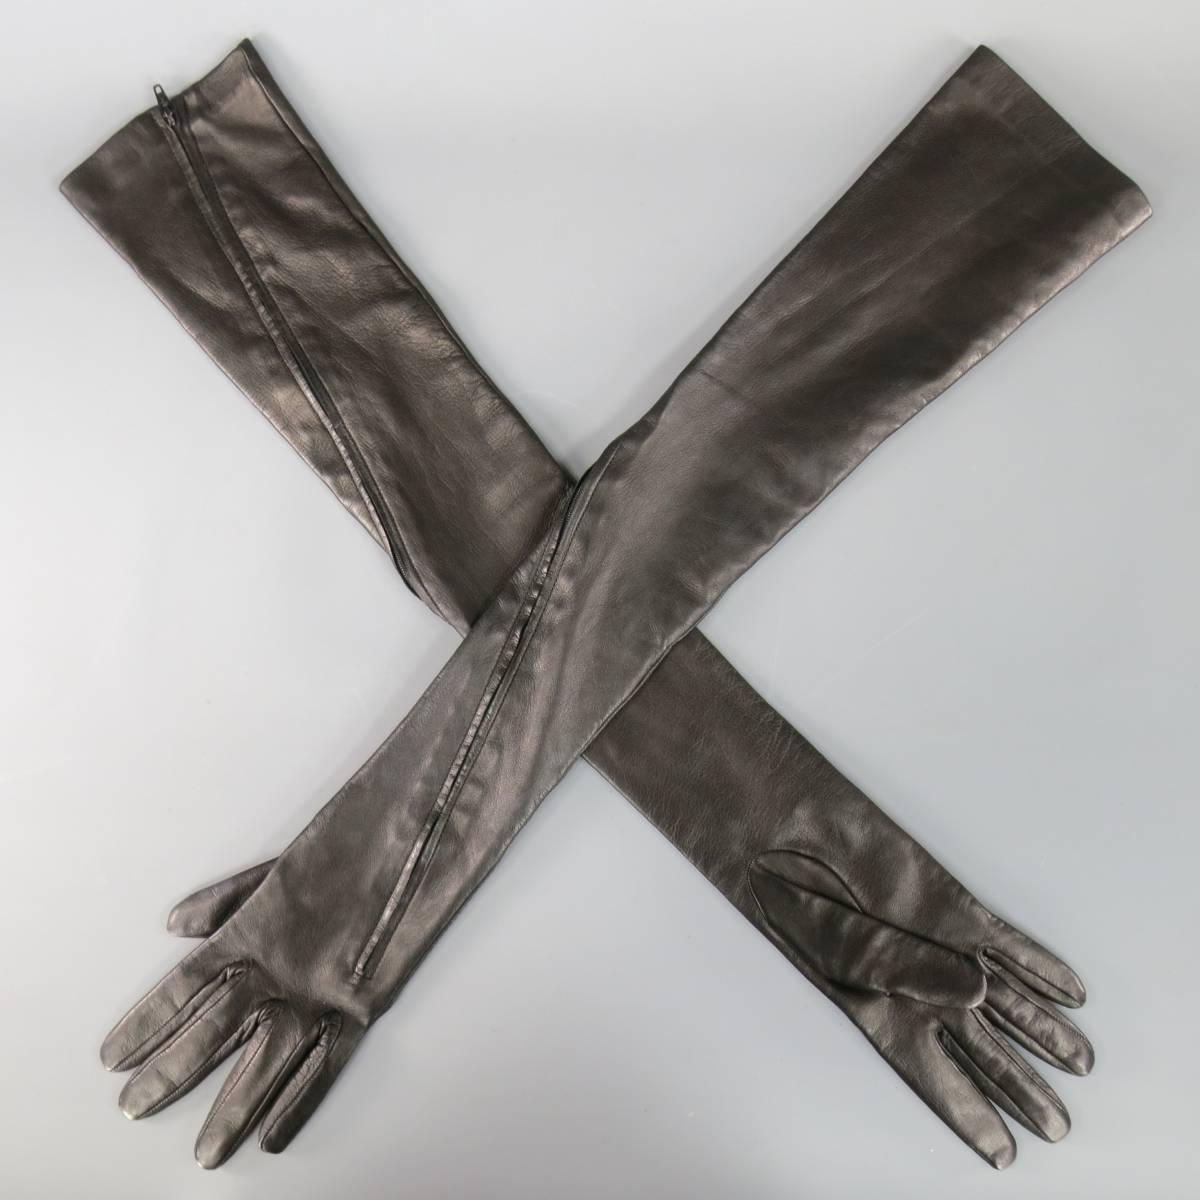 Fabulous YOHJI YAMAMOTO over the elbow length opera gloves in a soft black smooth sheep skin leather with full zip around closure from the arm to the knuckle. Made in Italy.
 
Excellent Pre-Owned Condition.
Marked: Size 6.5 (FZ-W54-739)
